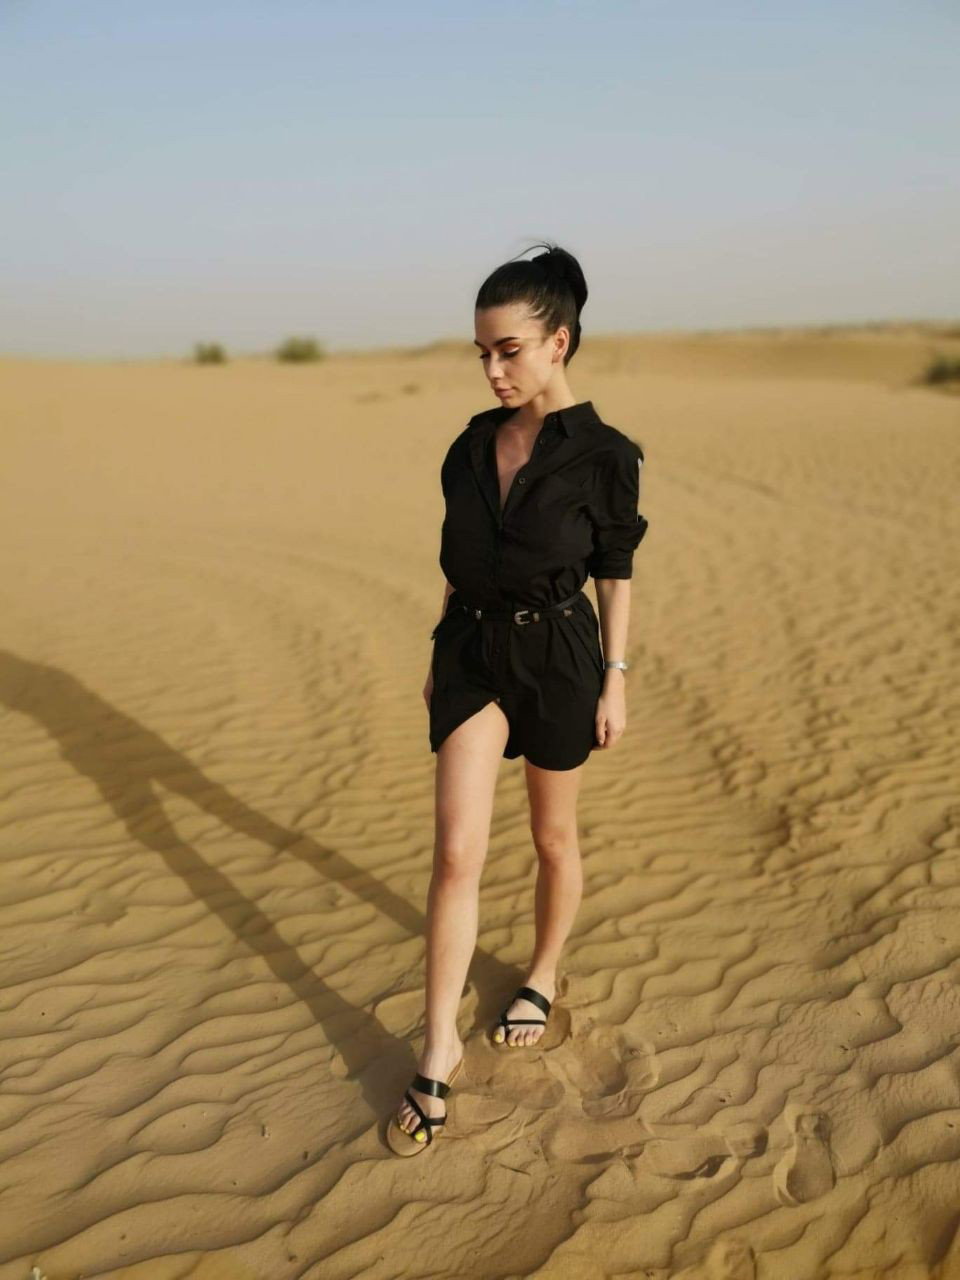 Photo by SereneSophie with the username @SereneSophie, who is a star user,  May 3, 2019 at 11:36 AM and the text says '#DubaiDiaries #SereneSophie #DubaiLife

I'm wandering through the desert🏜🌞... the thirst for🔭exploration never stops🎒👠💎 until I'll find my💗oasis of happiness💋

#FridayFeeling 🔛 #MyStory @ http://bit.ly/SereneSophie 🔥🔥🔥'